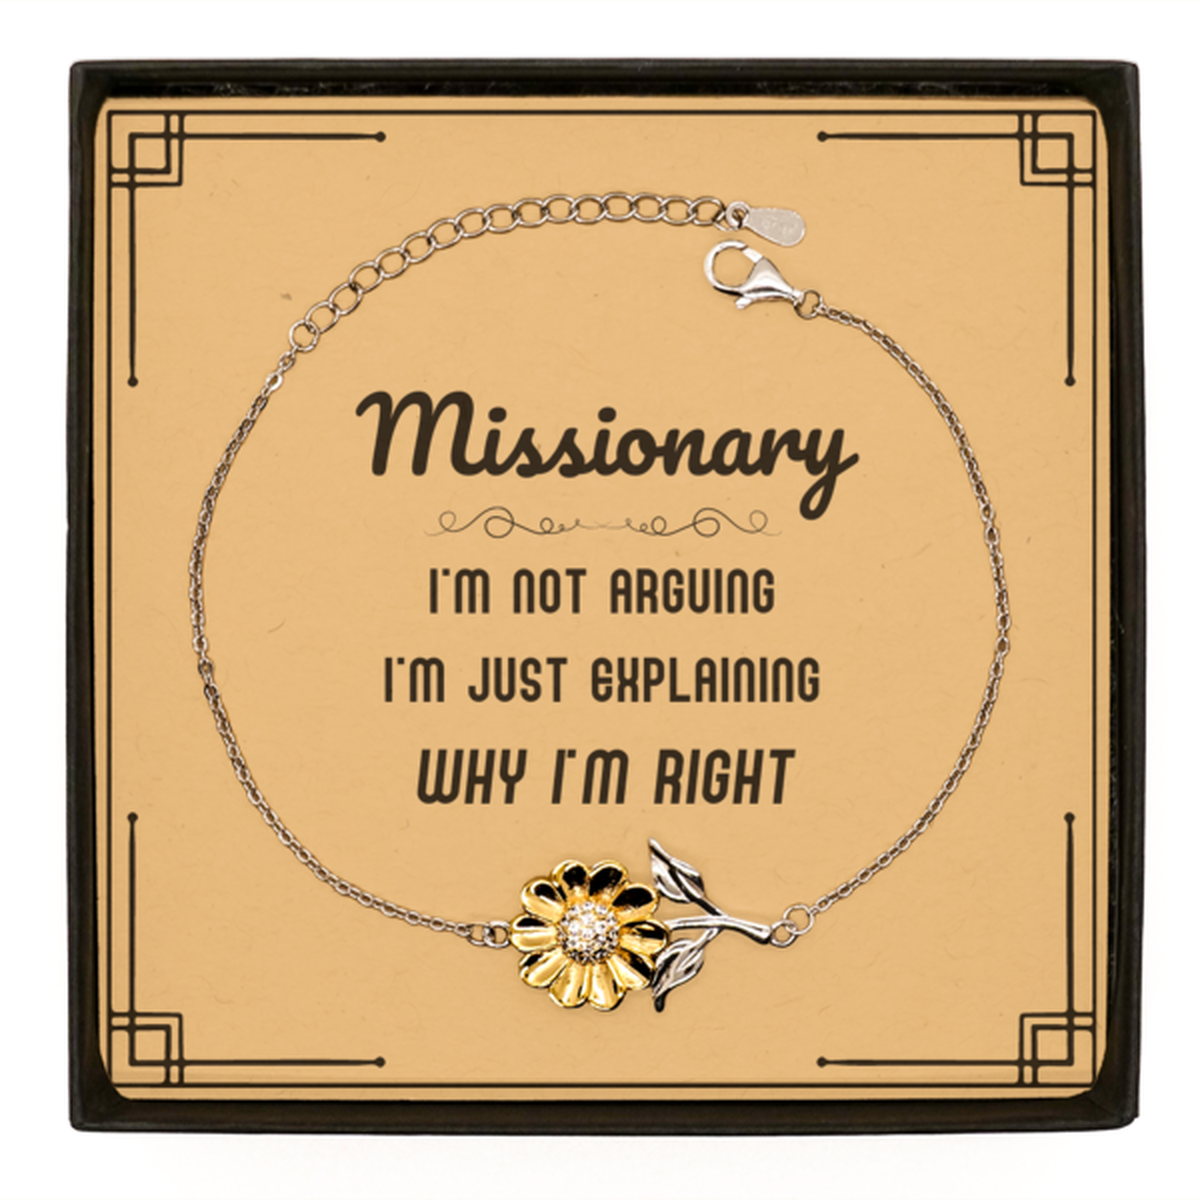 Missionary I'm not Arguing. I'm Just Explaining Why I'm RIGHT Sunflower Bracelet, Funny Saying Quote Missionary Gifts For Missionary Message Card Graduation Birthday Christmas Gifts for Men Women Coworker